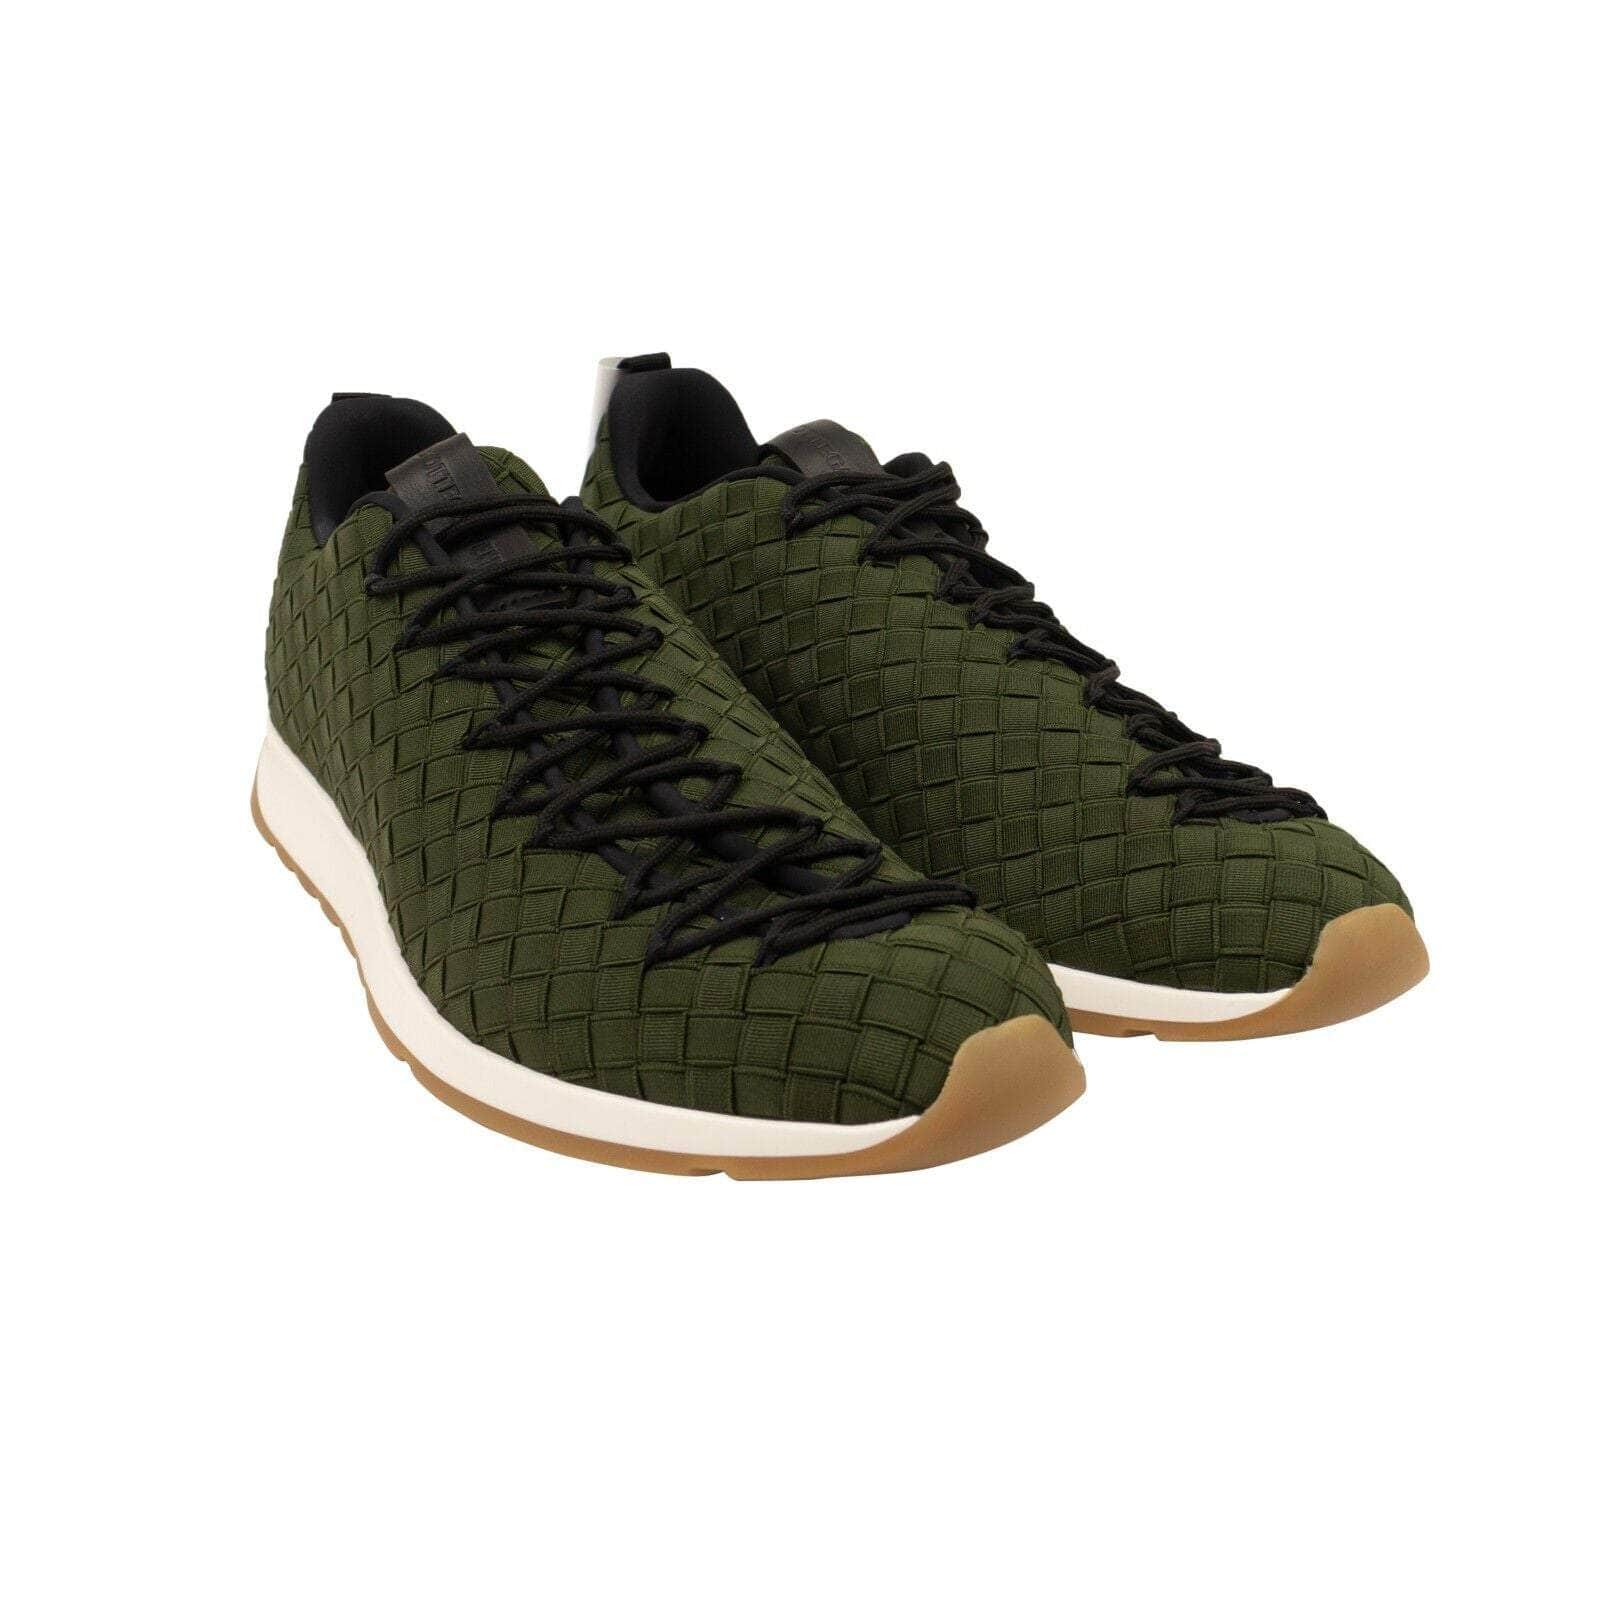 Bottega Veneta 250-500, channelenable-all, chicmi, couponcollection, gender-mens, main-shoes, mens-shoes, shop375, size-39, size-39-5, size-40, size-40-5, size-42-5 Khaki Green Intrecciato Athletic Sneakers